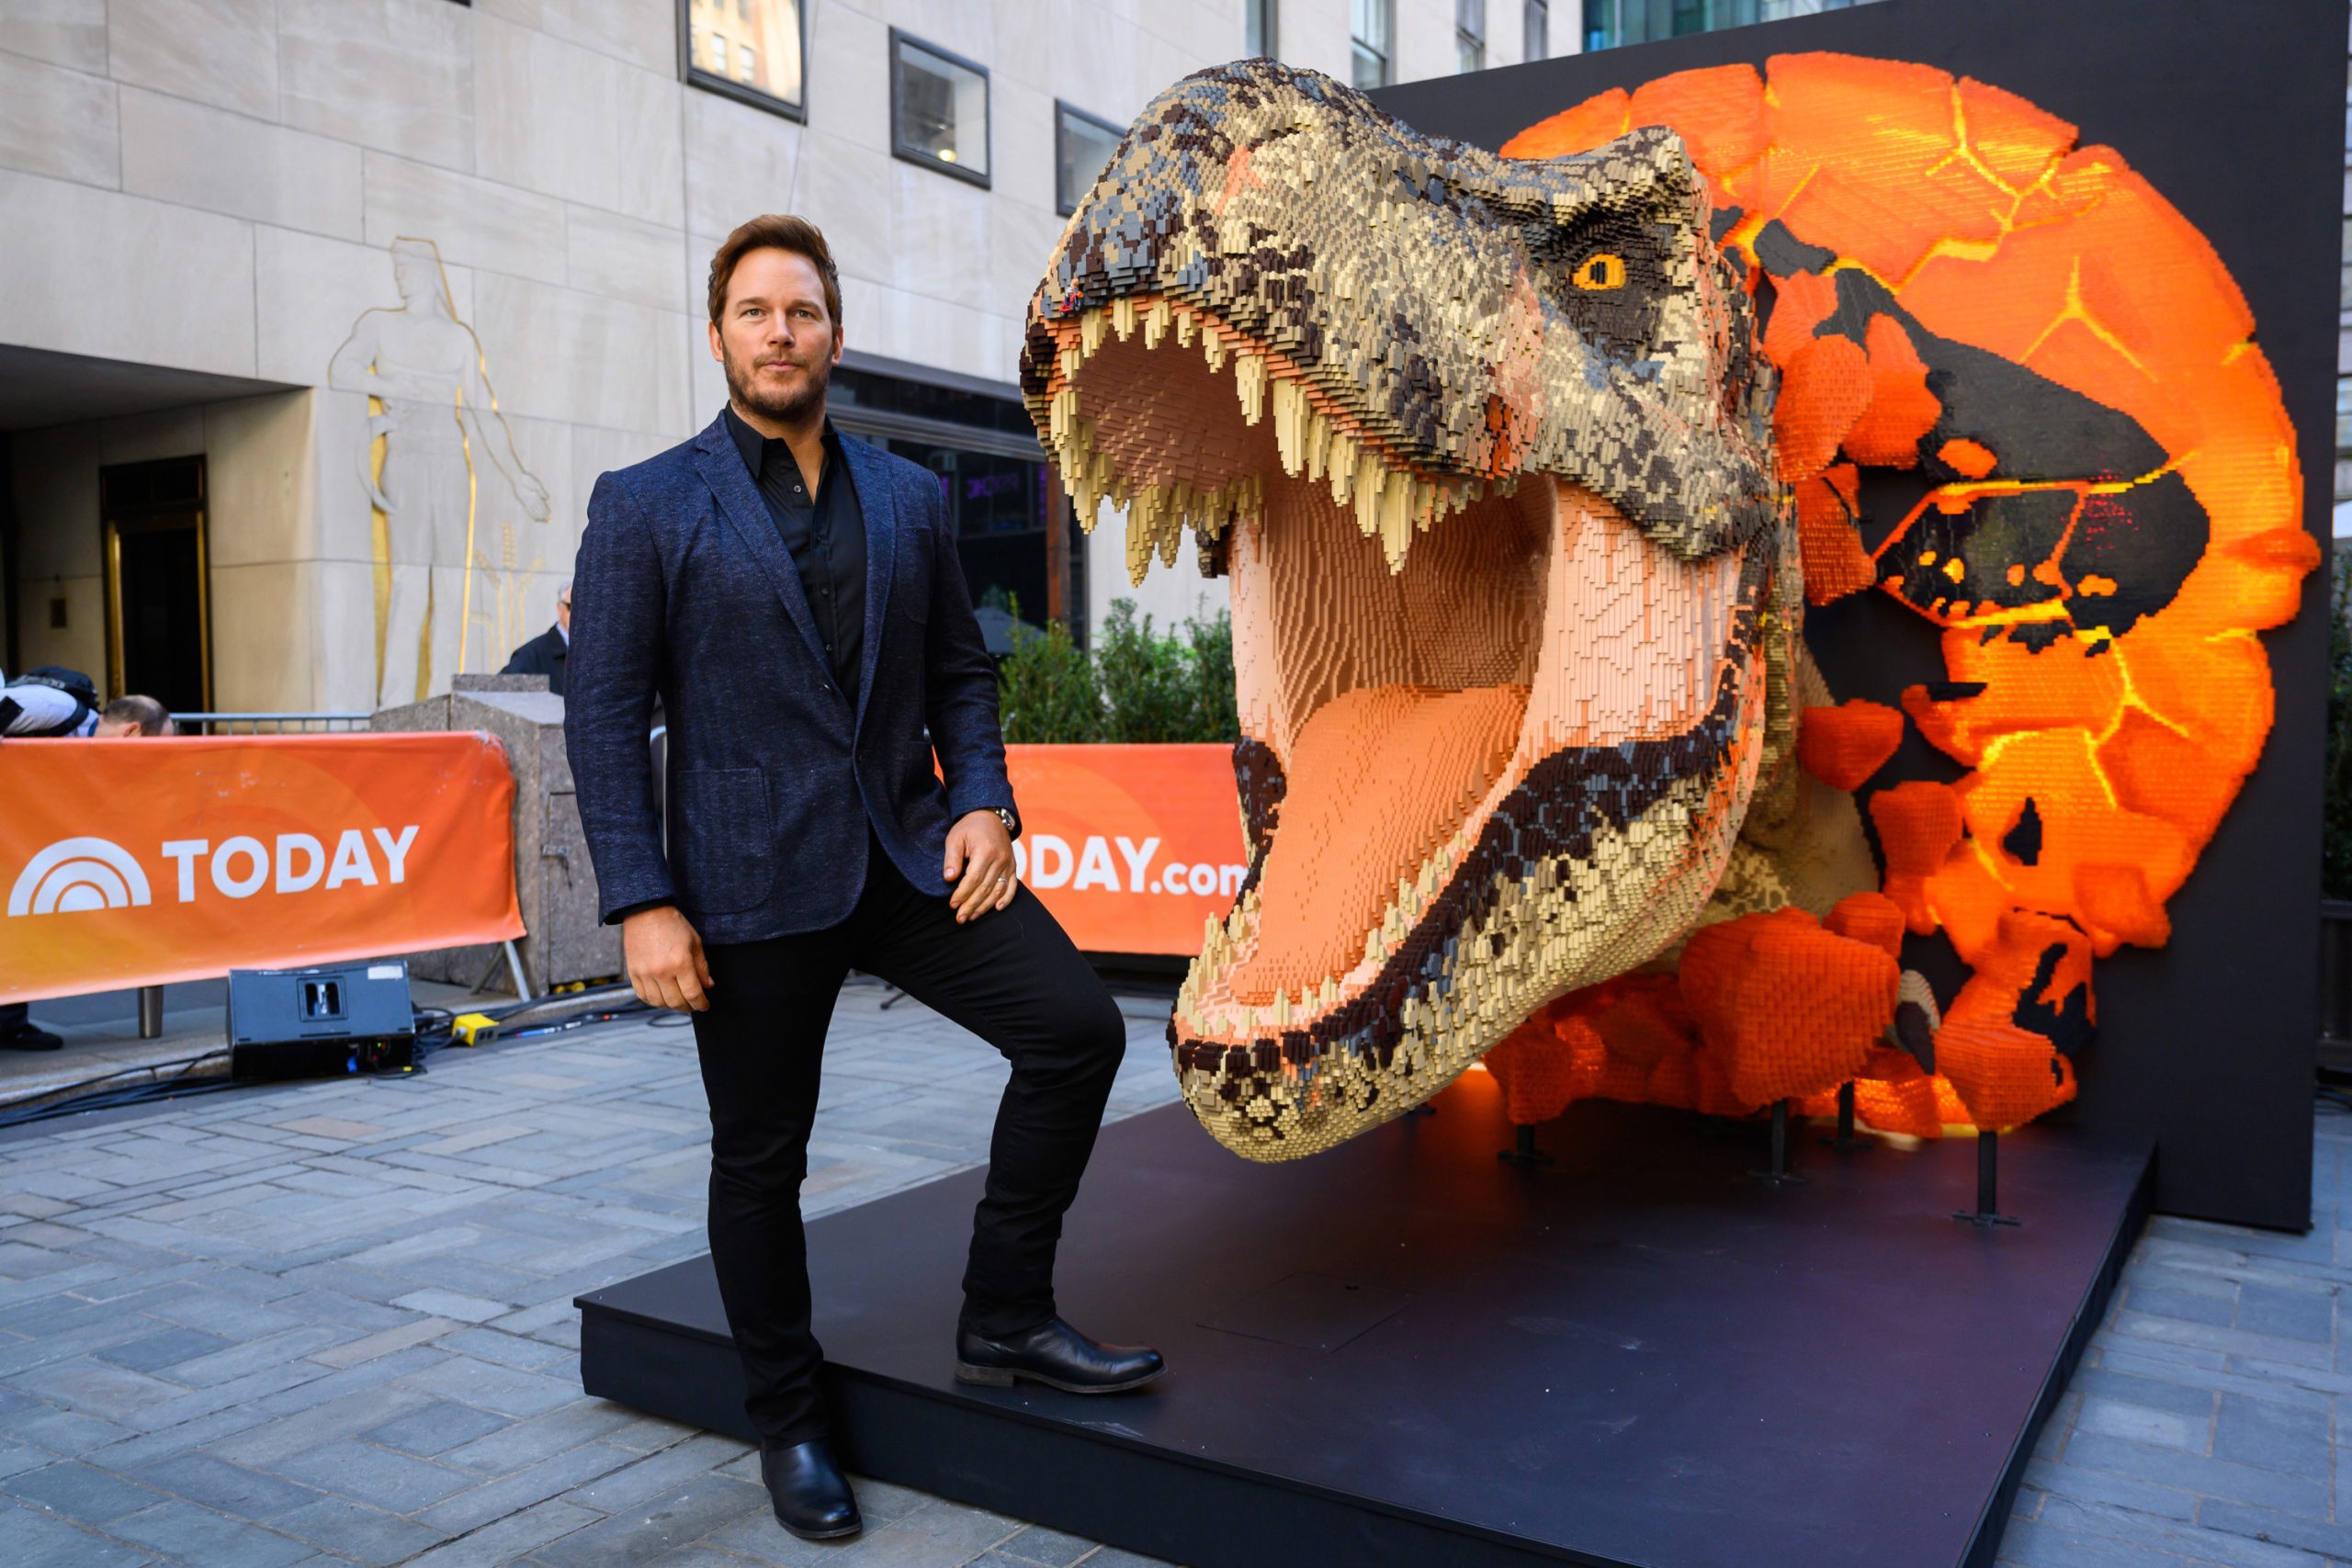 ‘Jurassic World’: Chris Pratt Compares the Franchise to Marvel, Says it May Not be Over